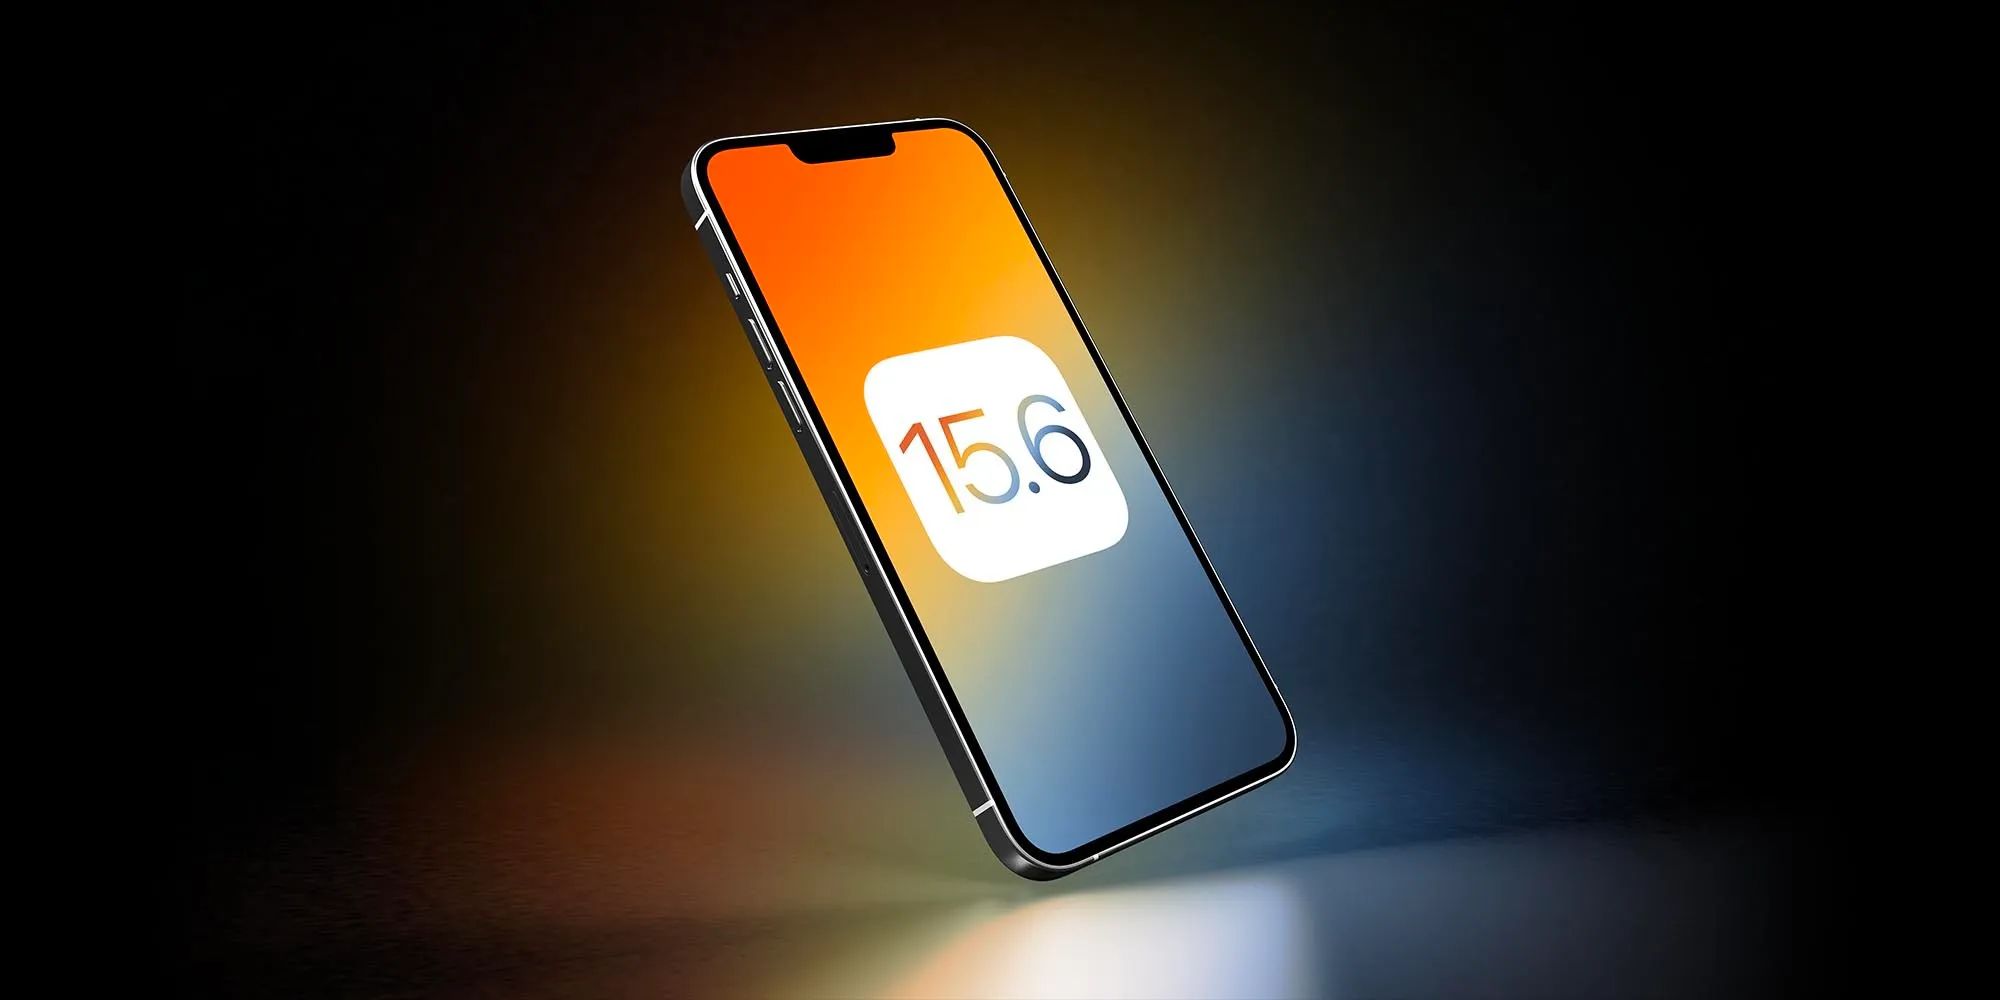 Apple Stops Signing iOS 15.6 Following iOS 15.6.1 Release, Downgrade No Longer Possible